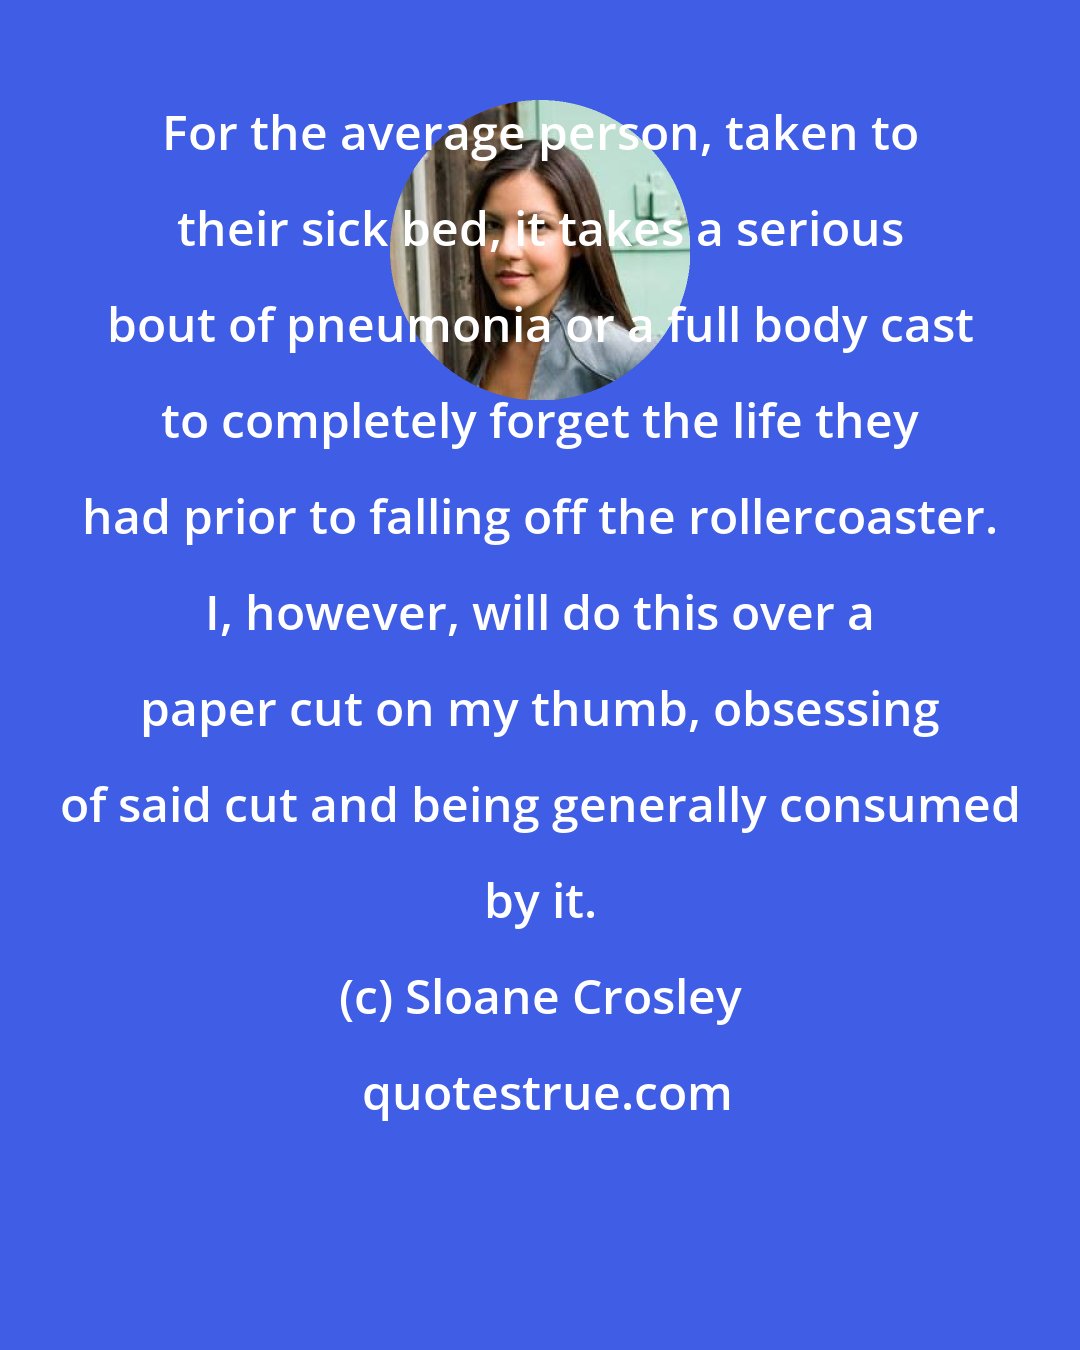 Sloane Crosley: For the average person, taken to their sick bed, it takes a serious bout of pneumonia or a full body cast to completely forget the life they had prior to falling off the rollercoaster. I, however, will do this over a paper cut on my thumb, obsessing of said cut and being generally consumed by it.